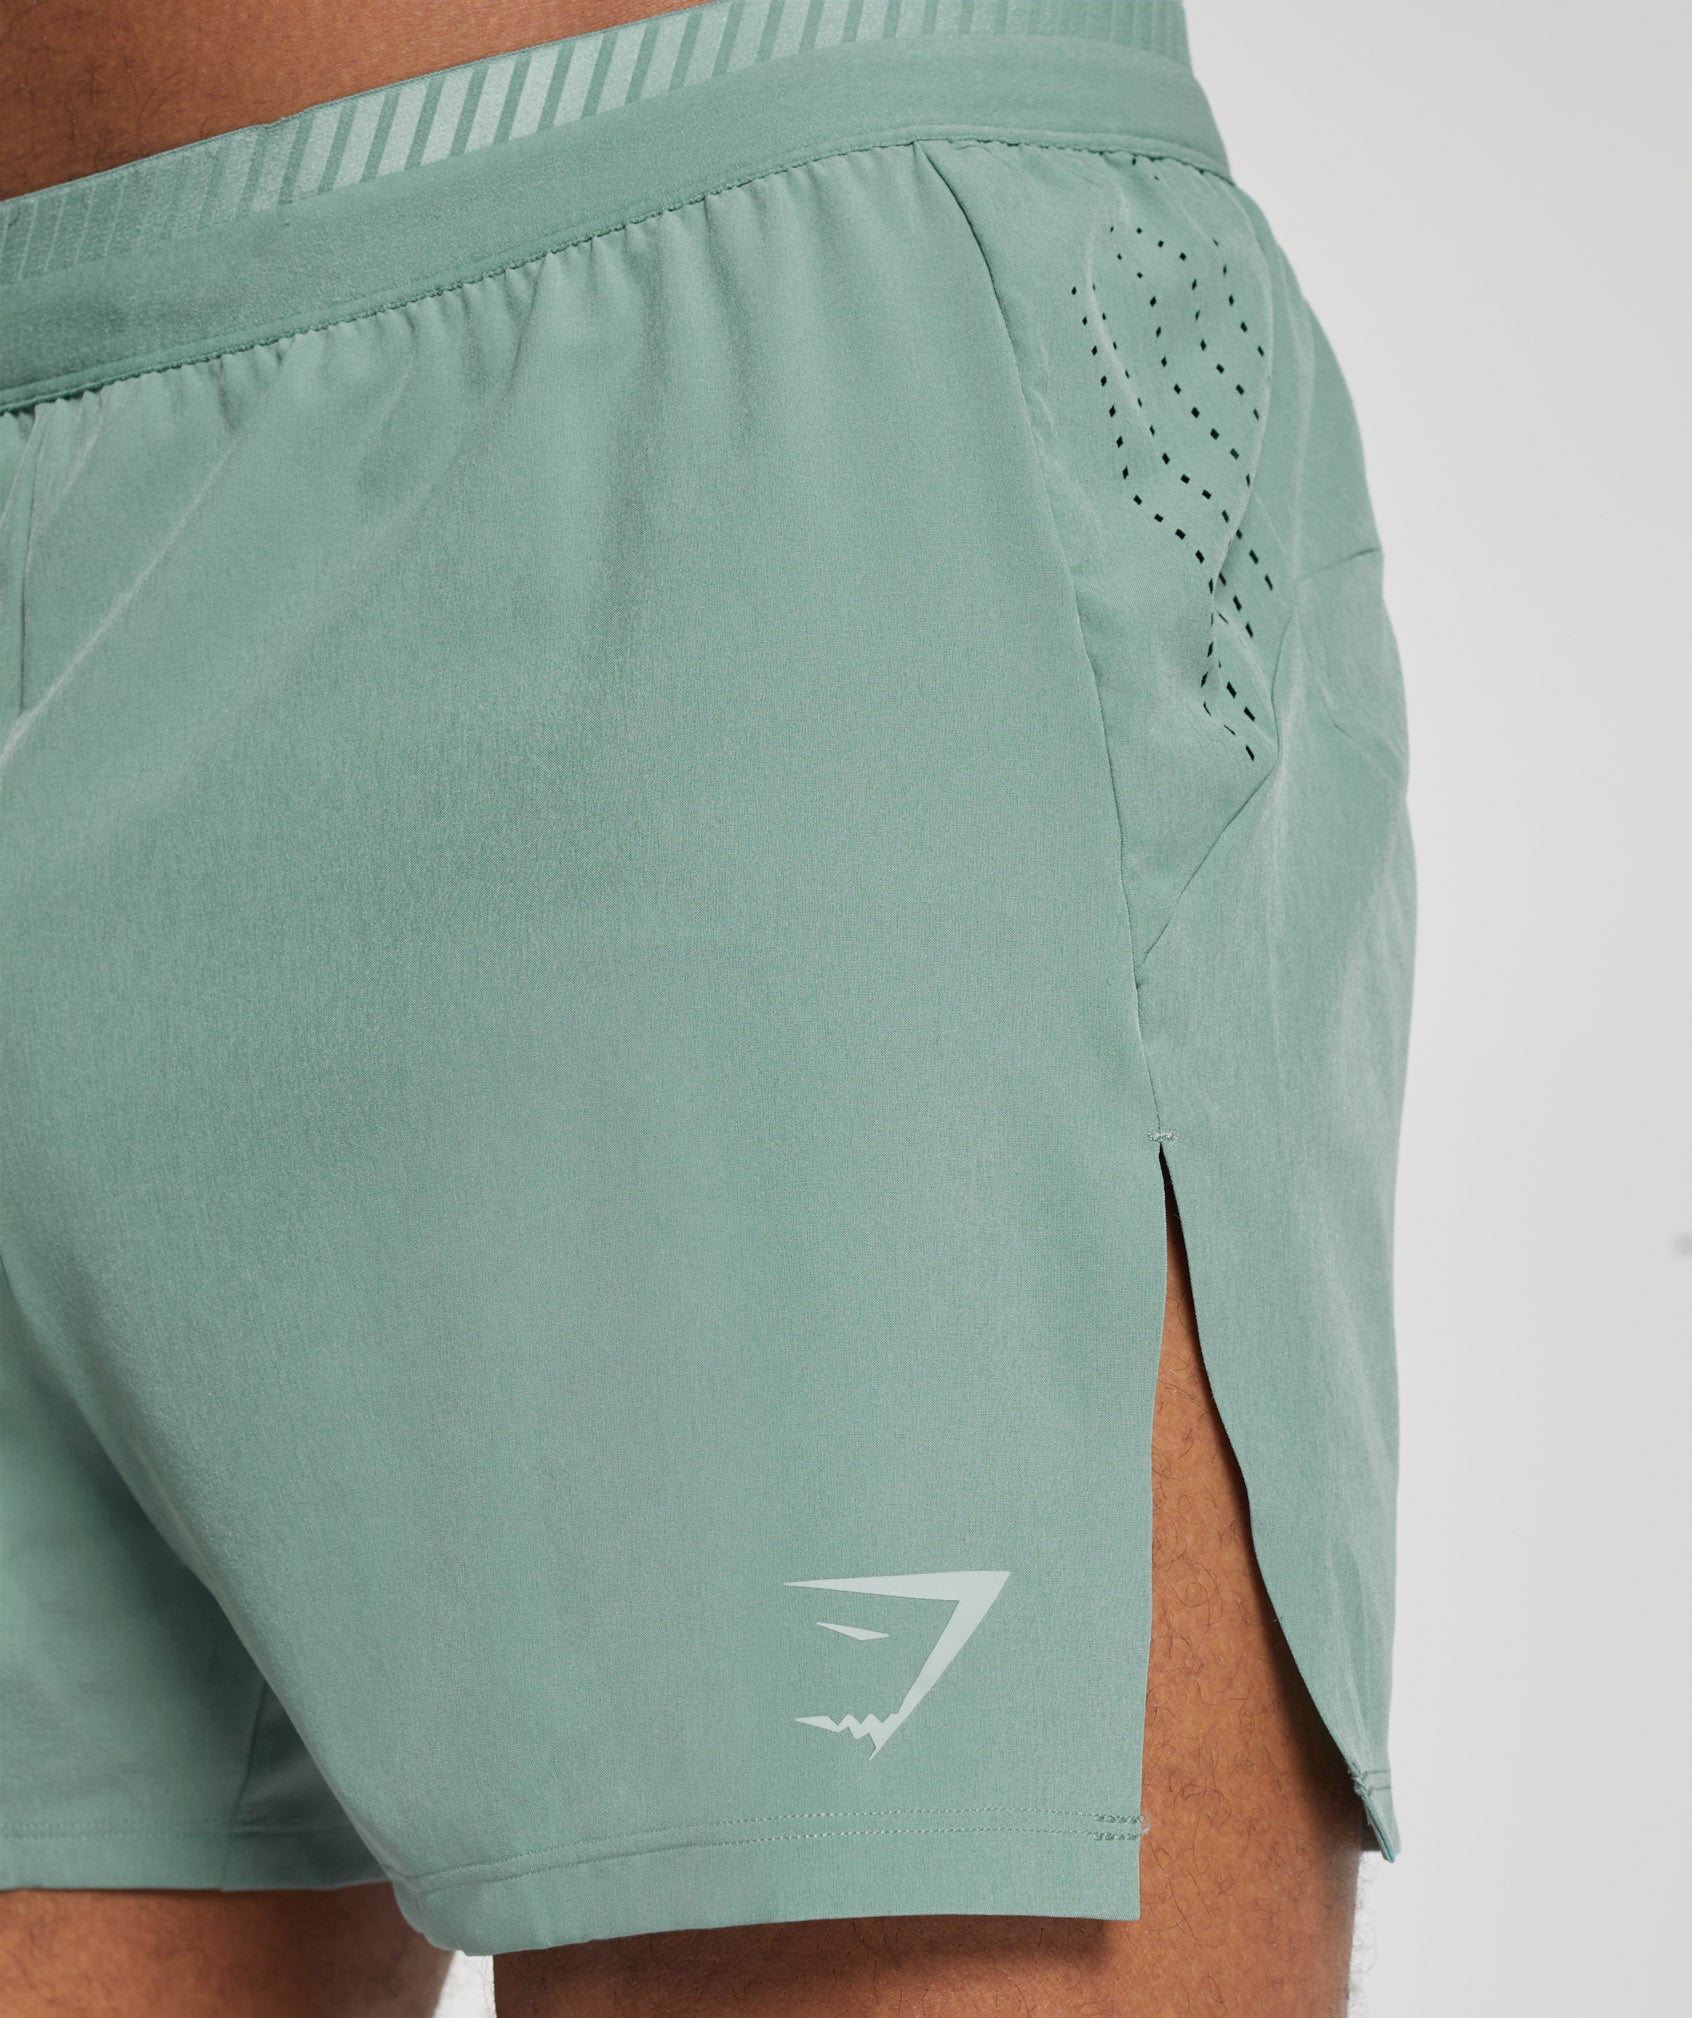 Apex Run 4" Shorts in Ink Teal - view 6